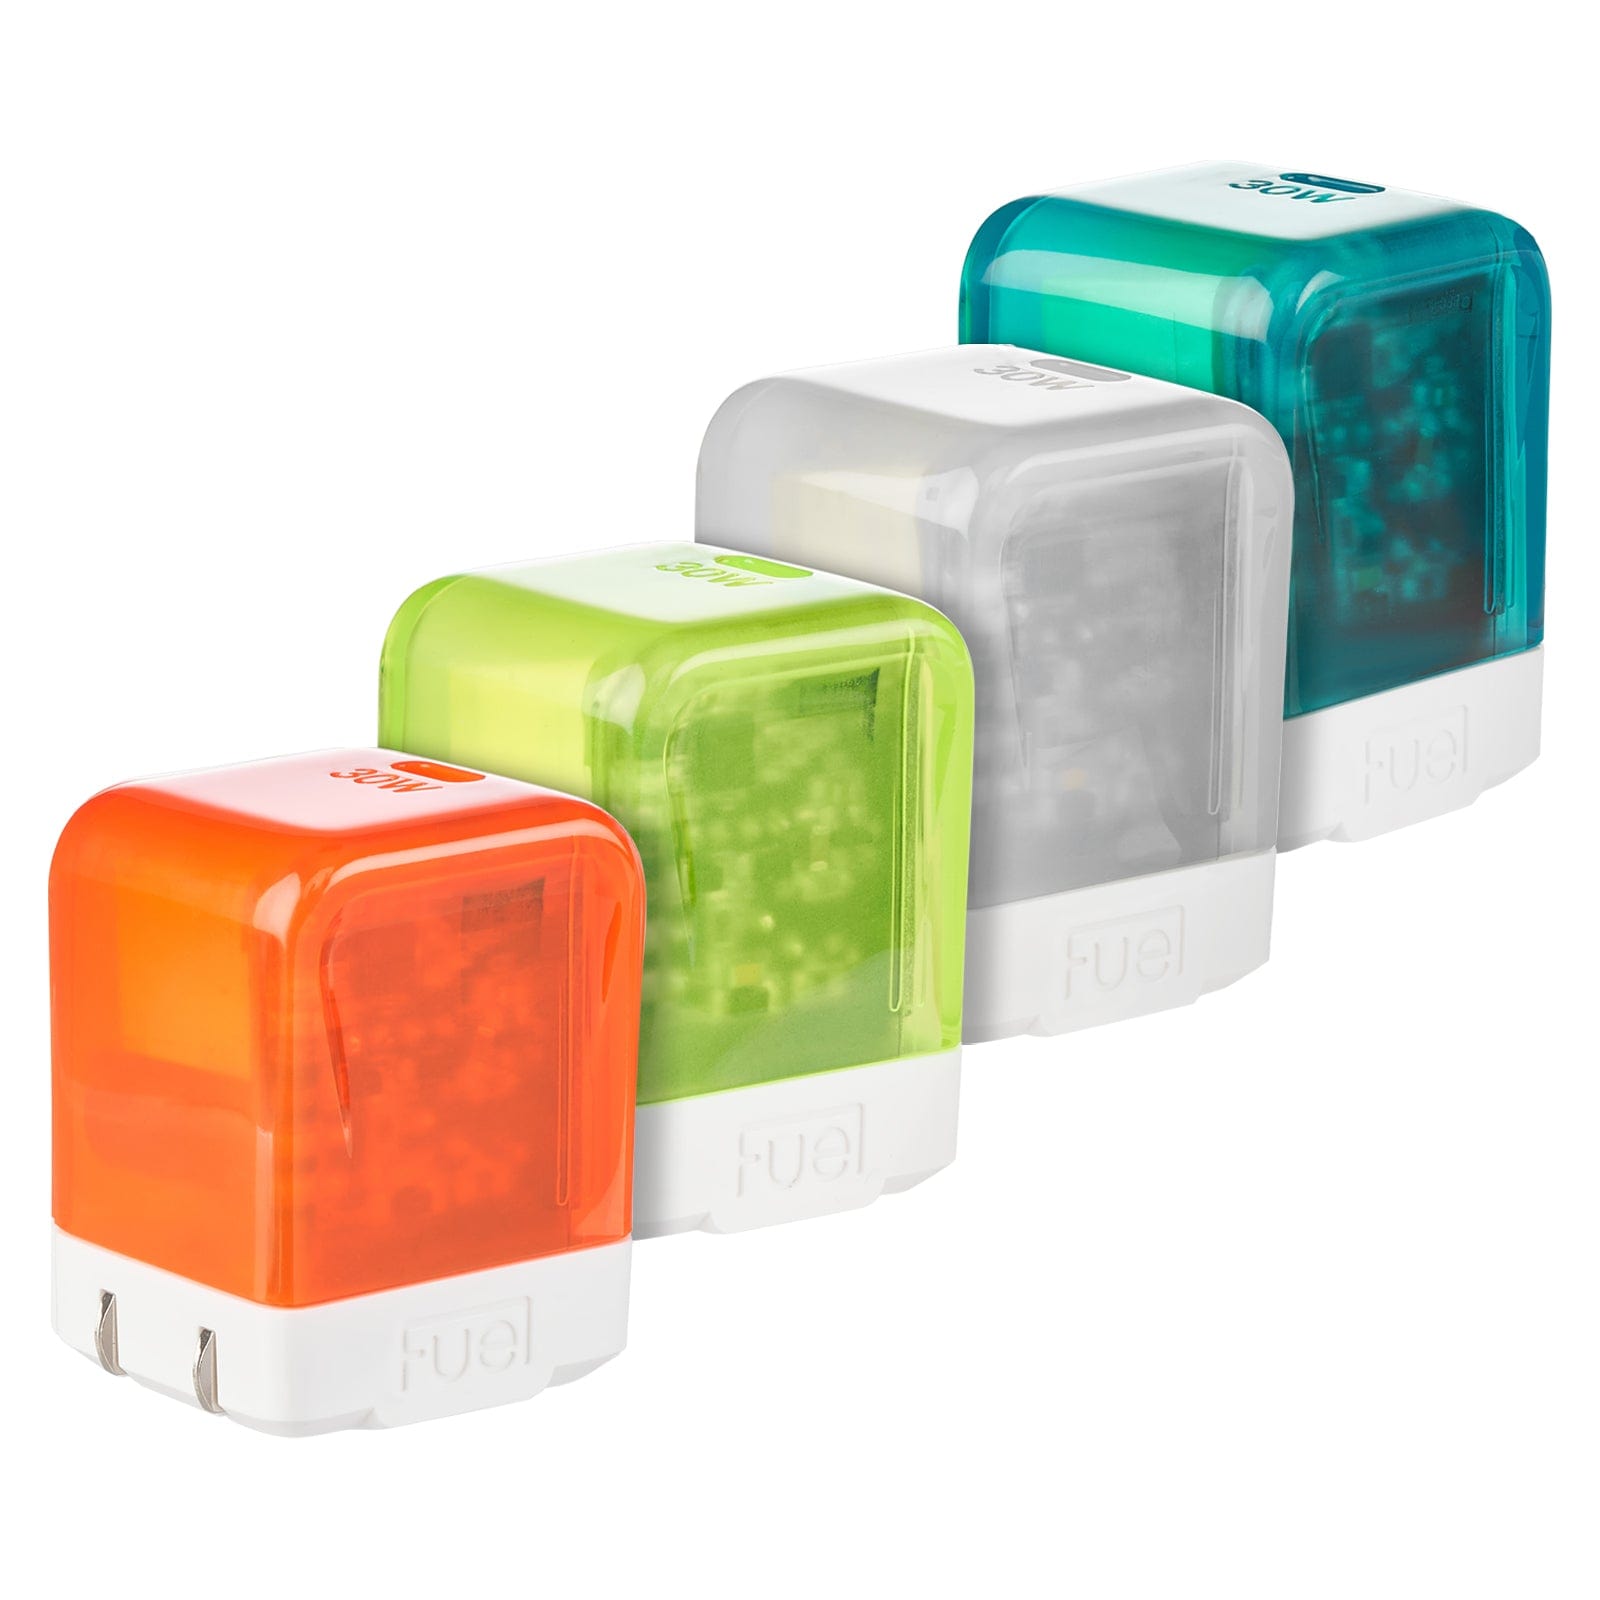 Fuel 30W Translucent Wall Chargers (Multi-Color 4 Pack)